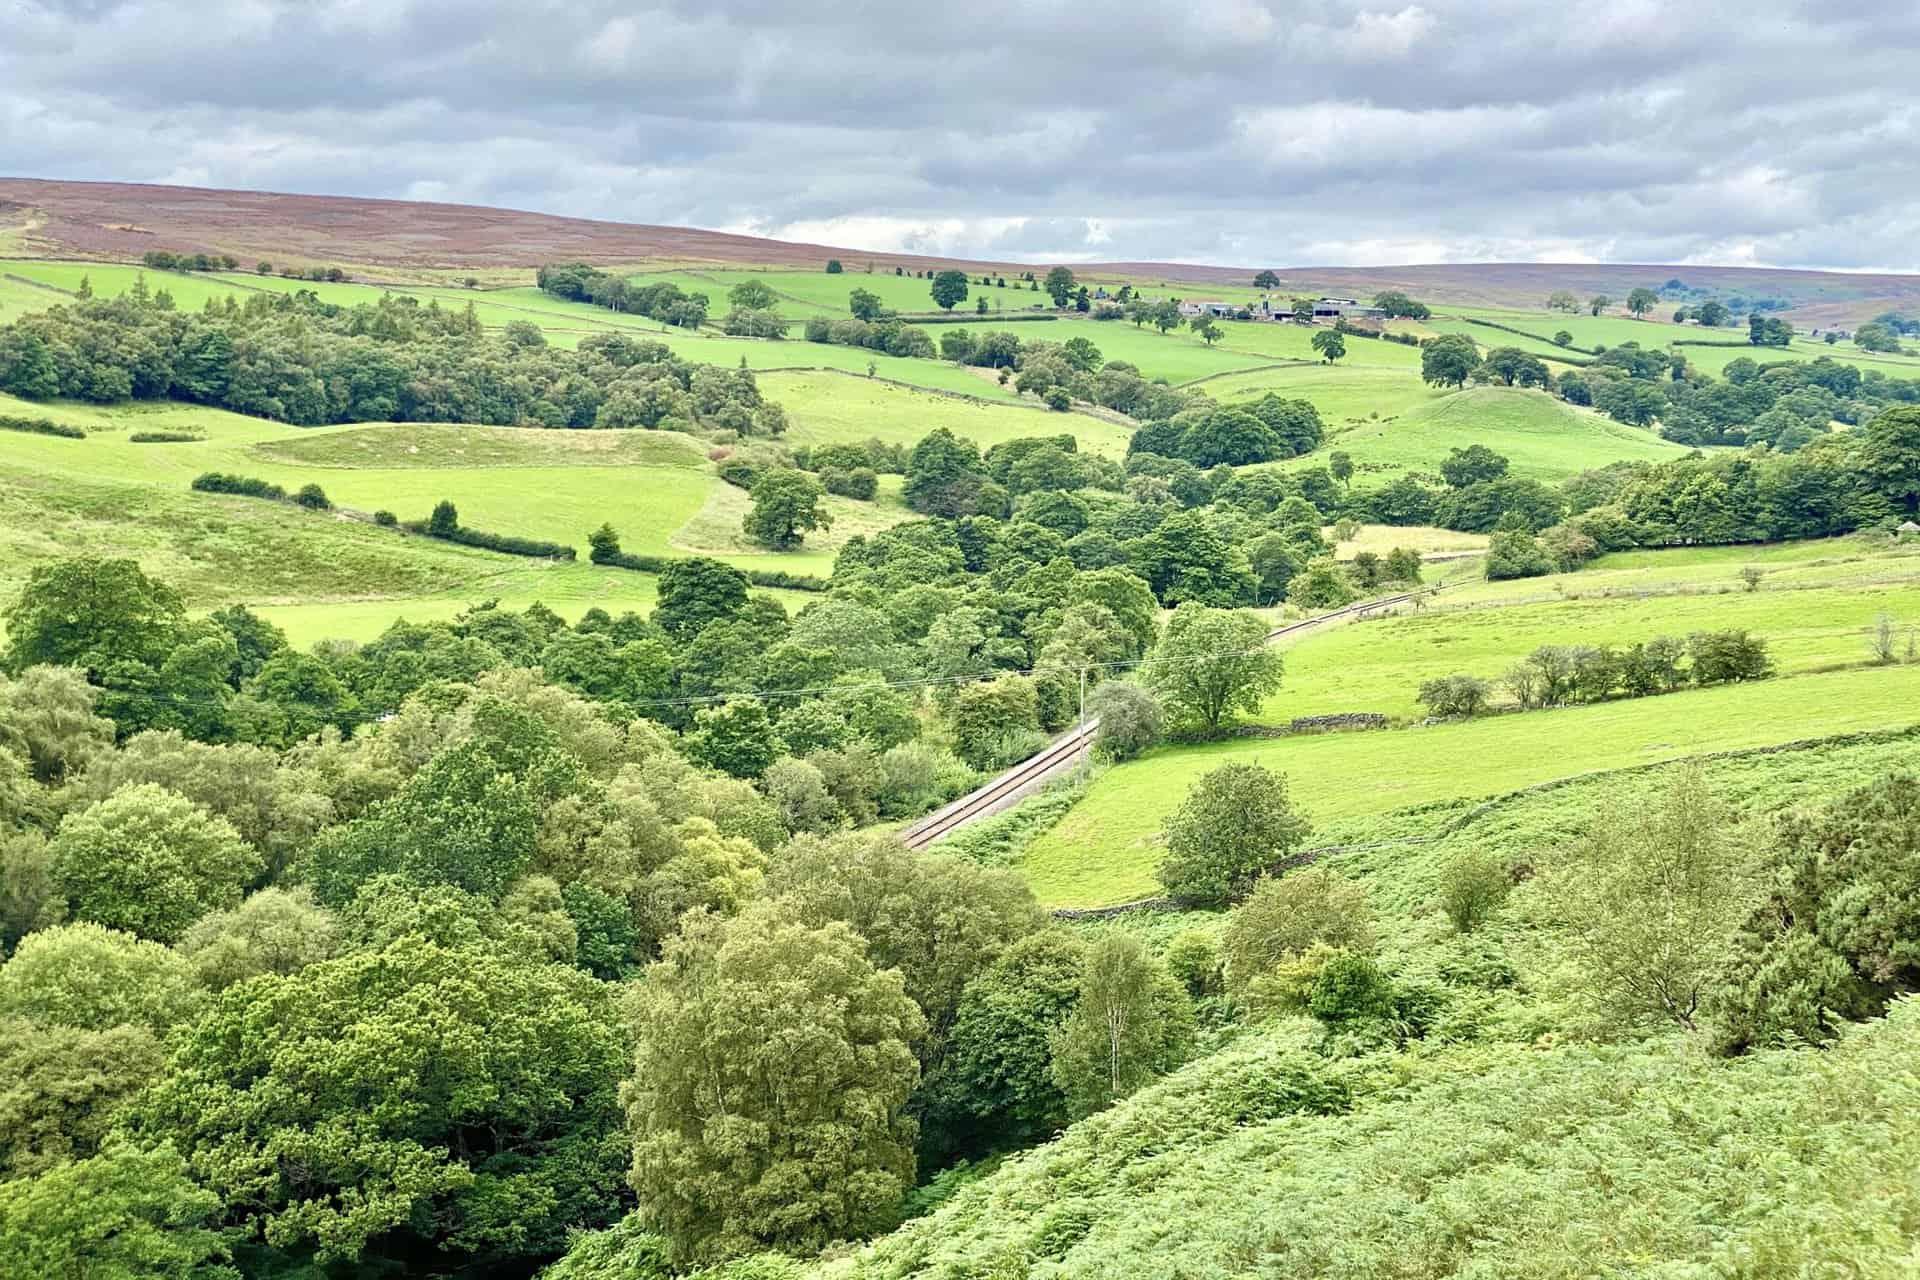 The Esk Valley Railway between Commondale and Castleton.